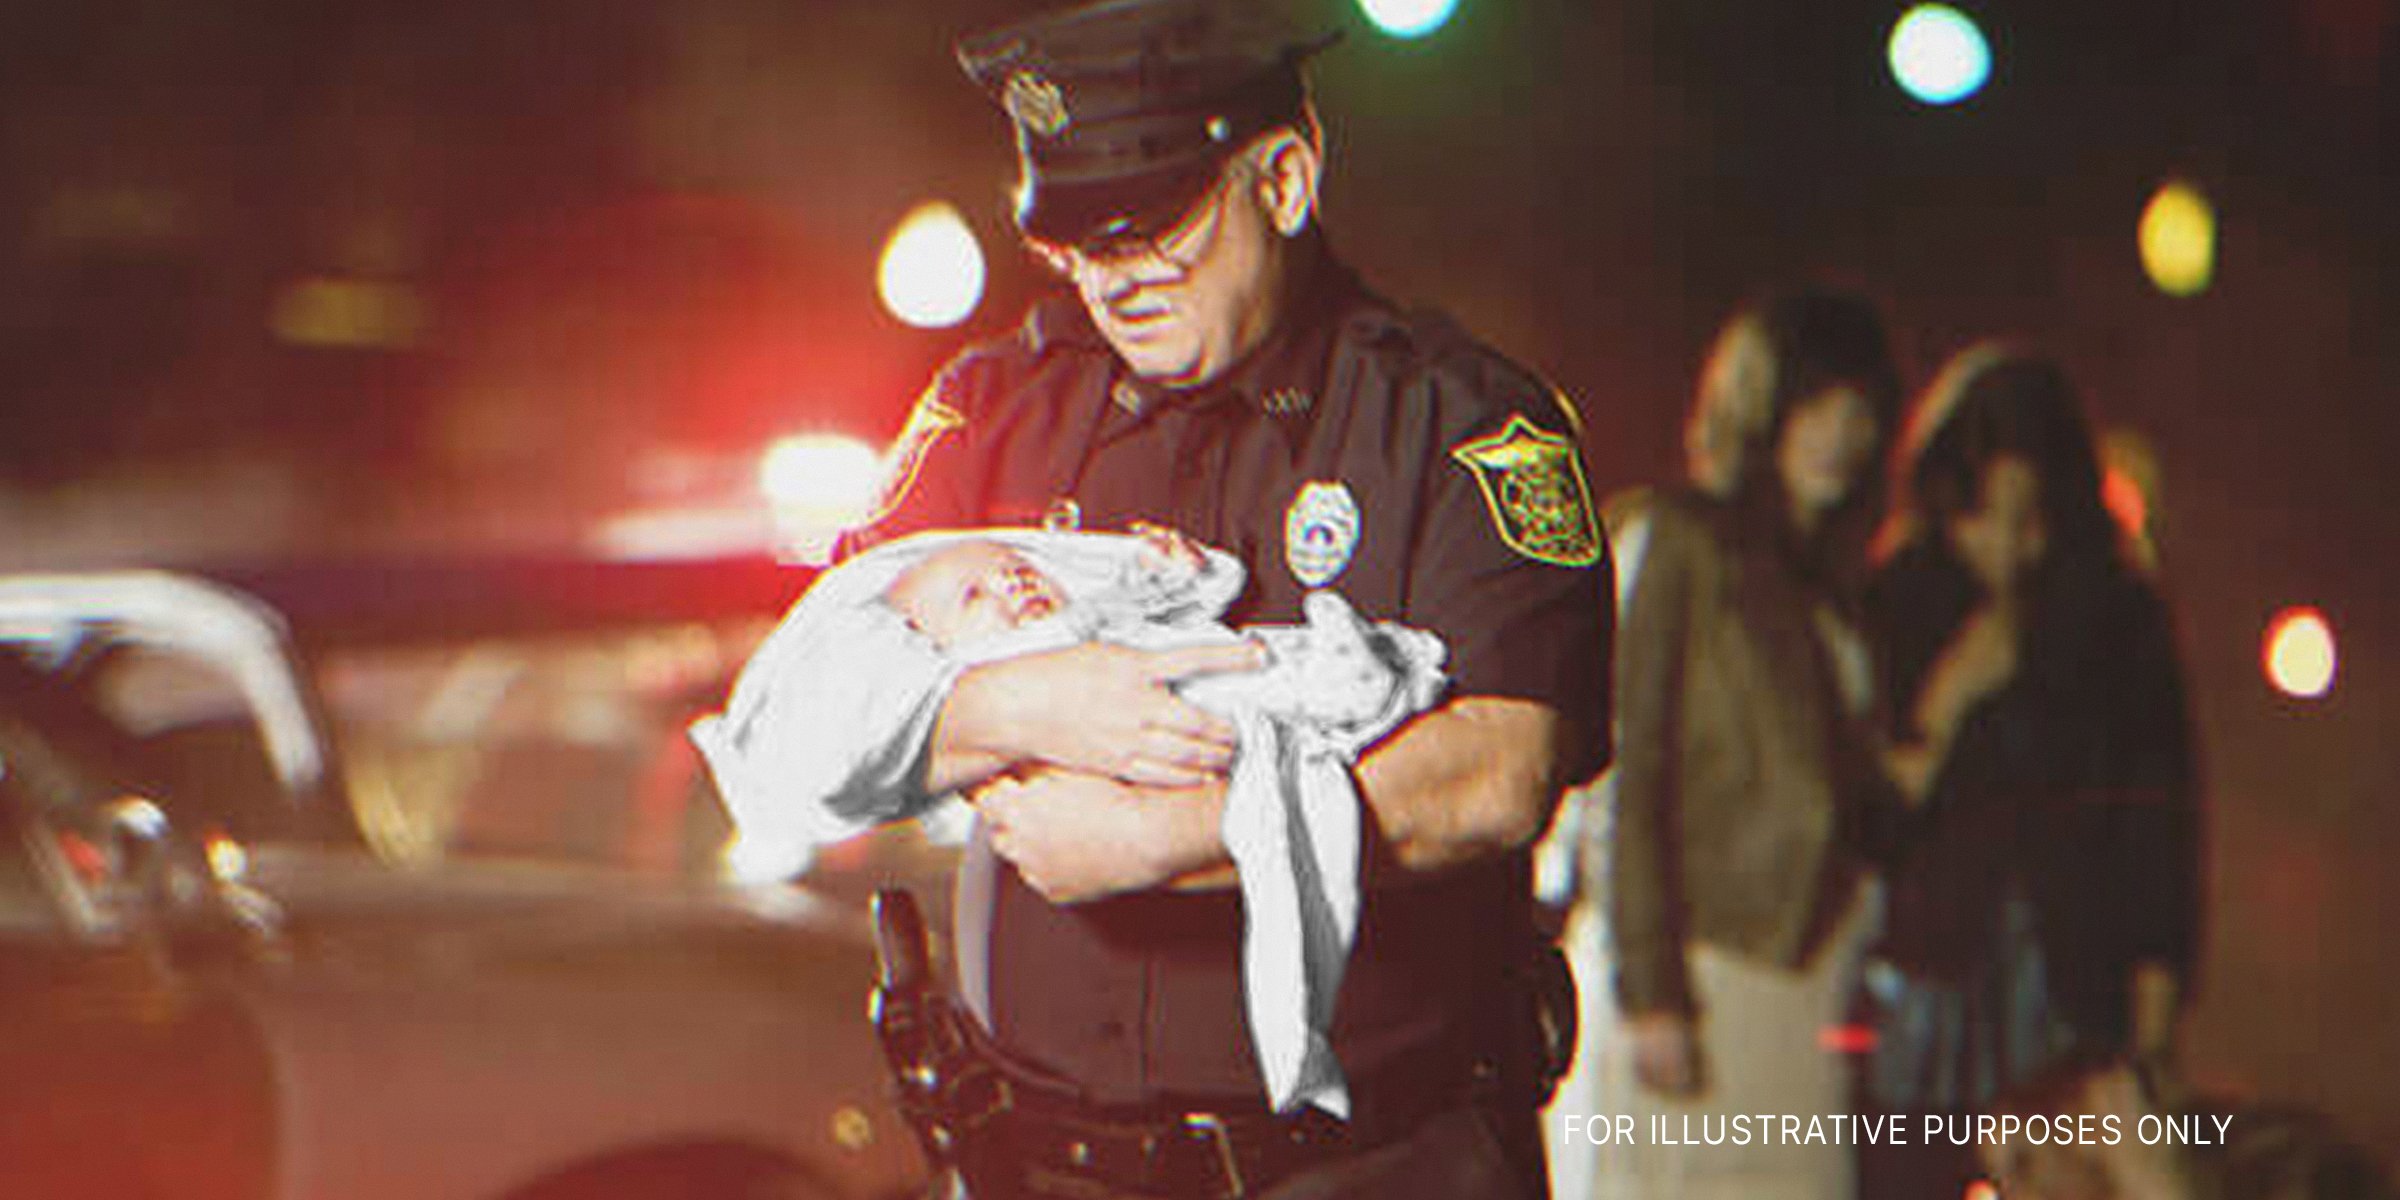 Cop holding baby. | Source: Getty Images